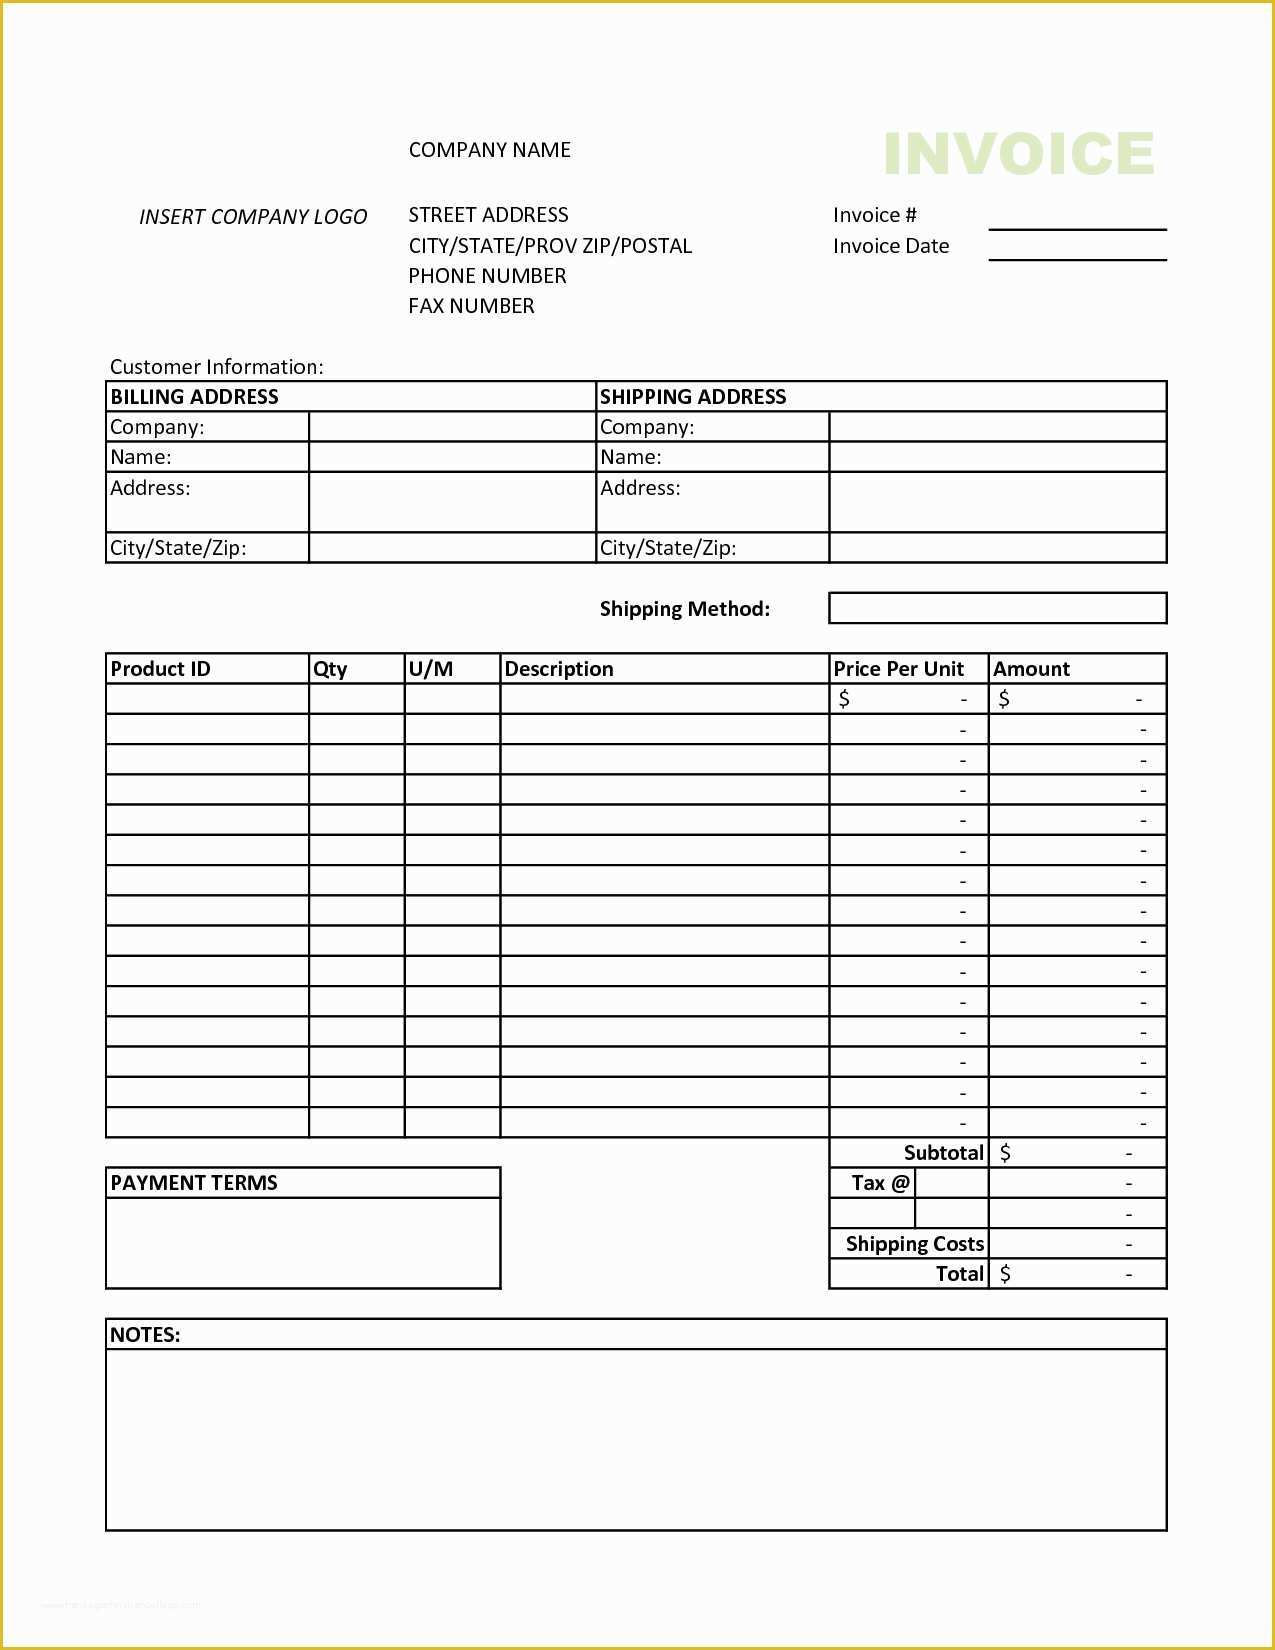 Microsoft Excel Invoice Template Free Of Invoice Template Excel 2010